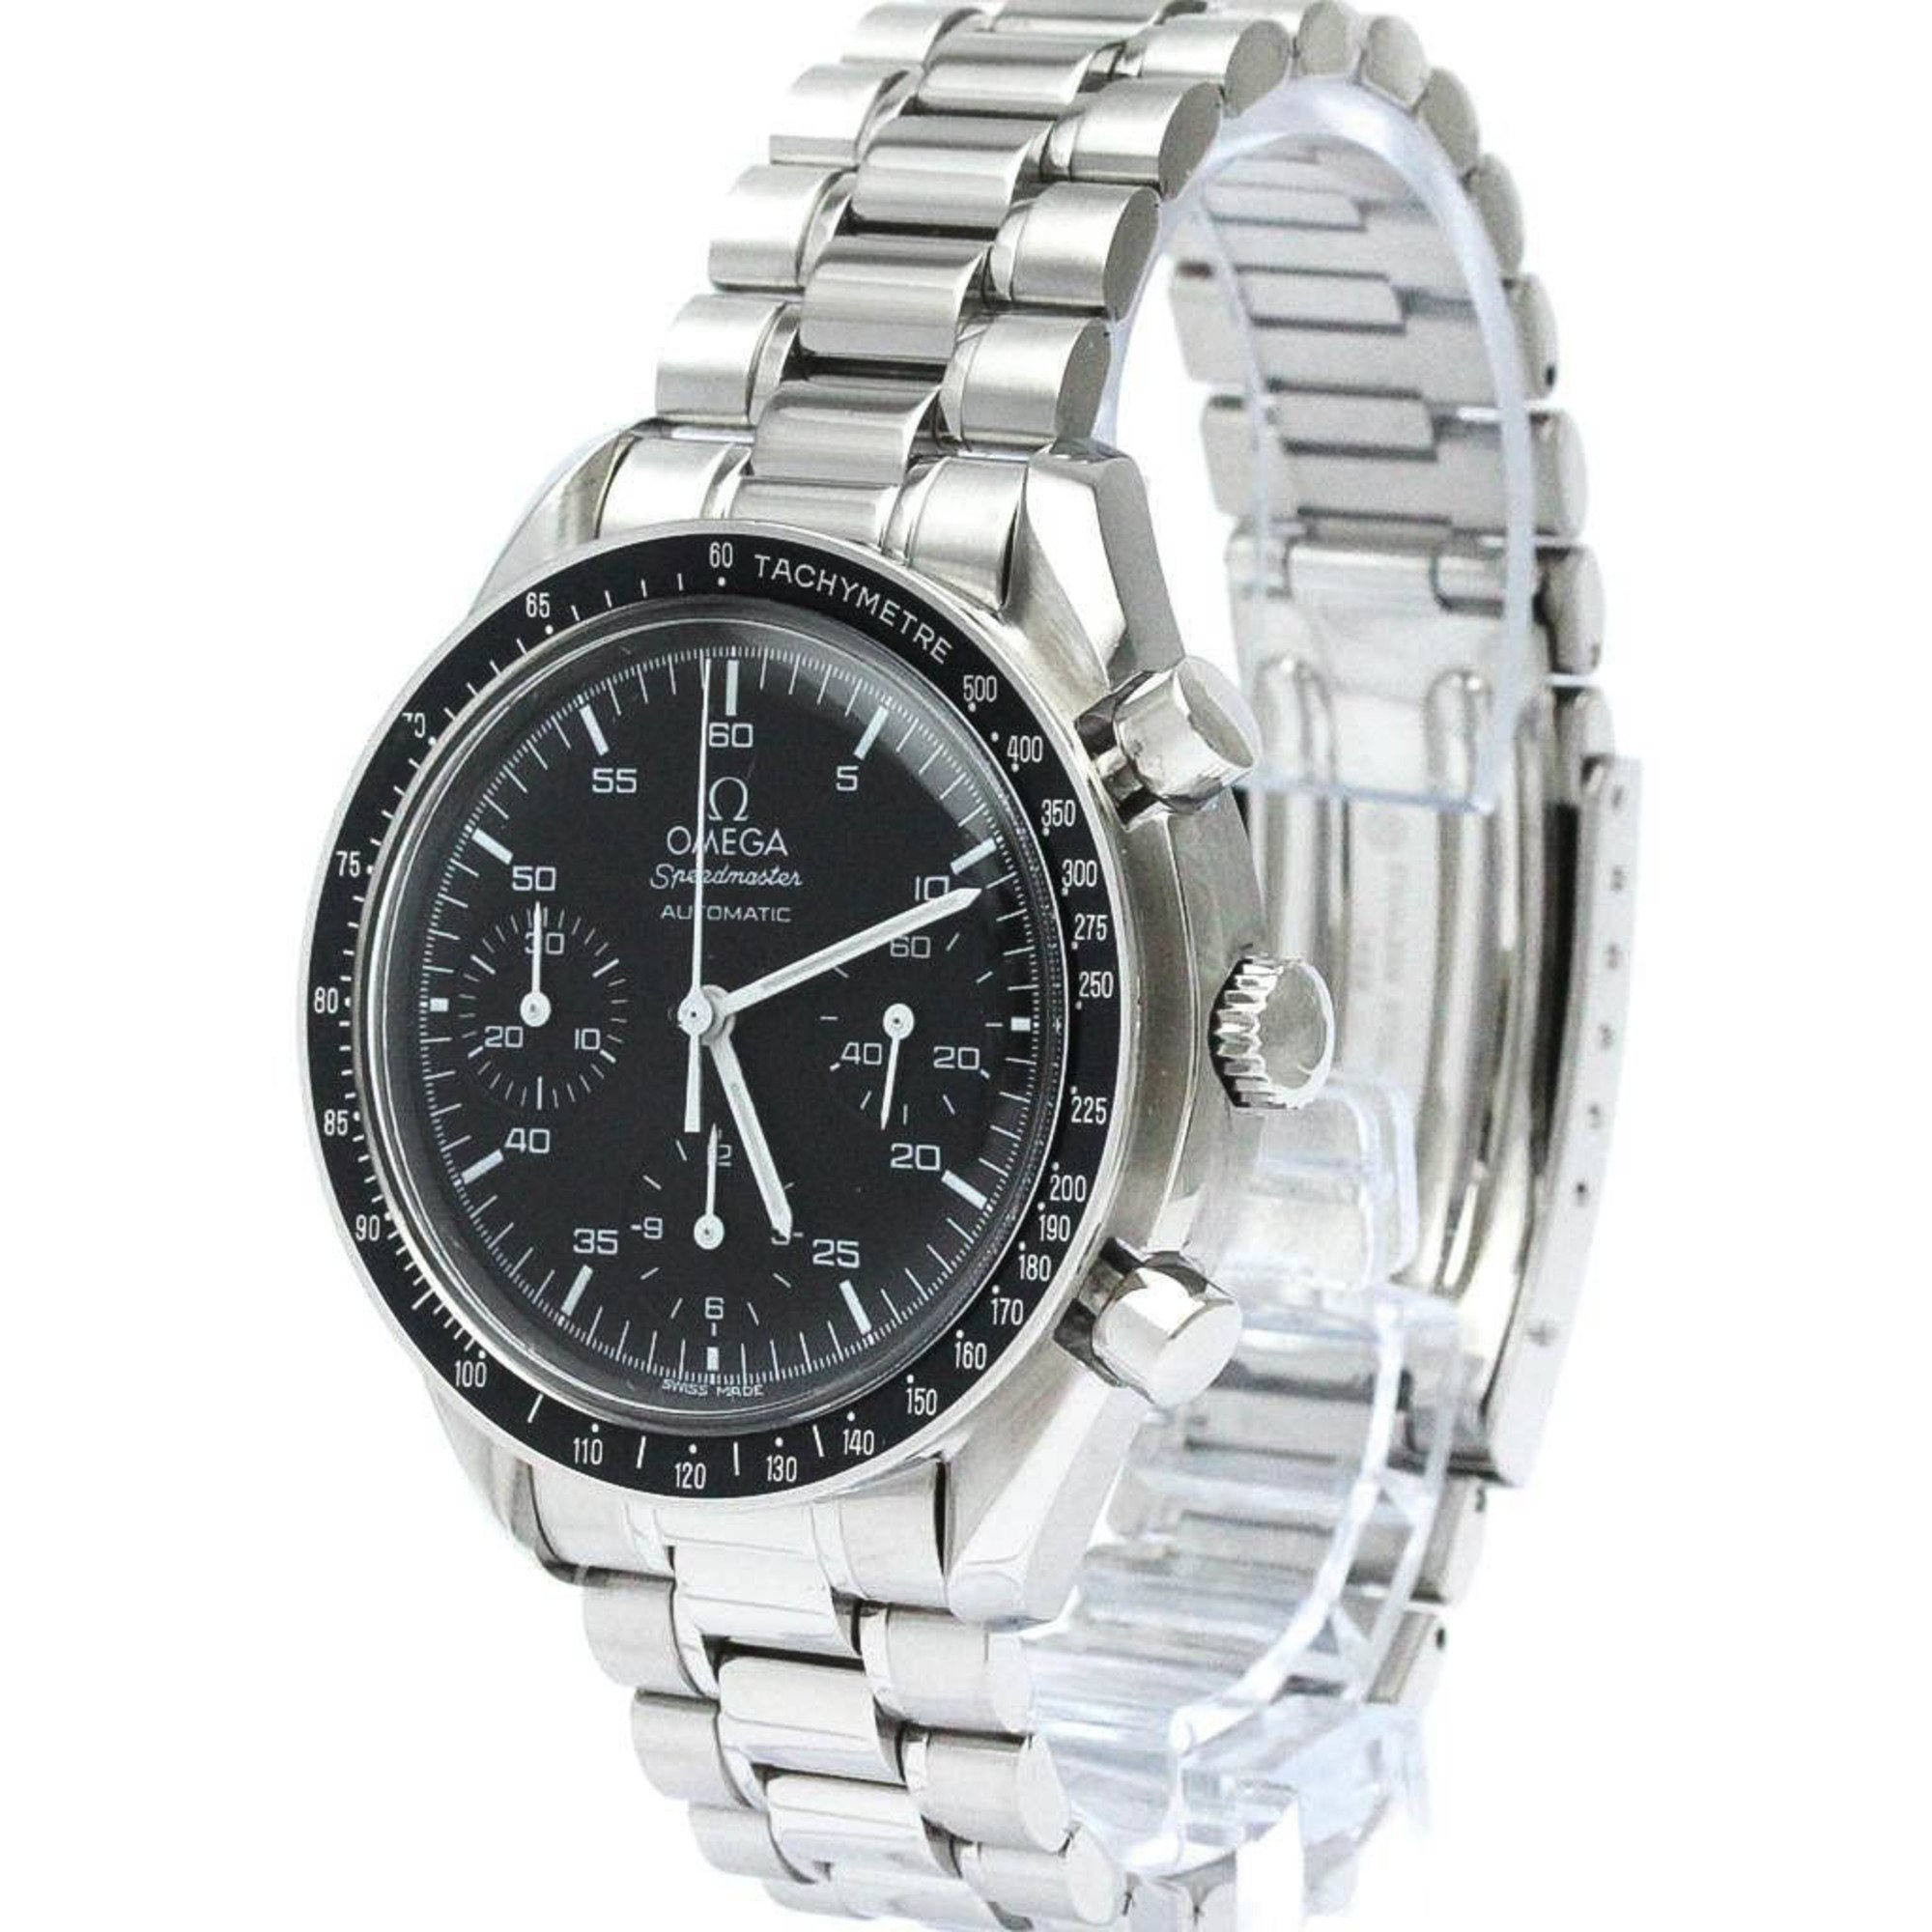 Polished OMEGA Speedmaster Automatic Steel Mens Watch 3510.50 BF567345